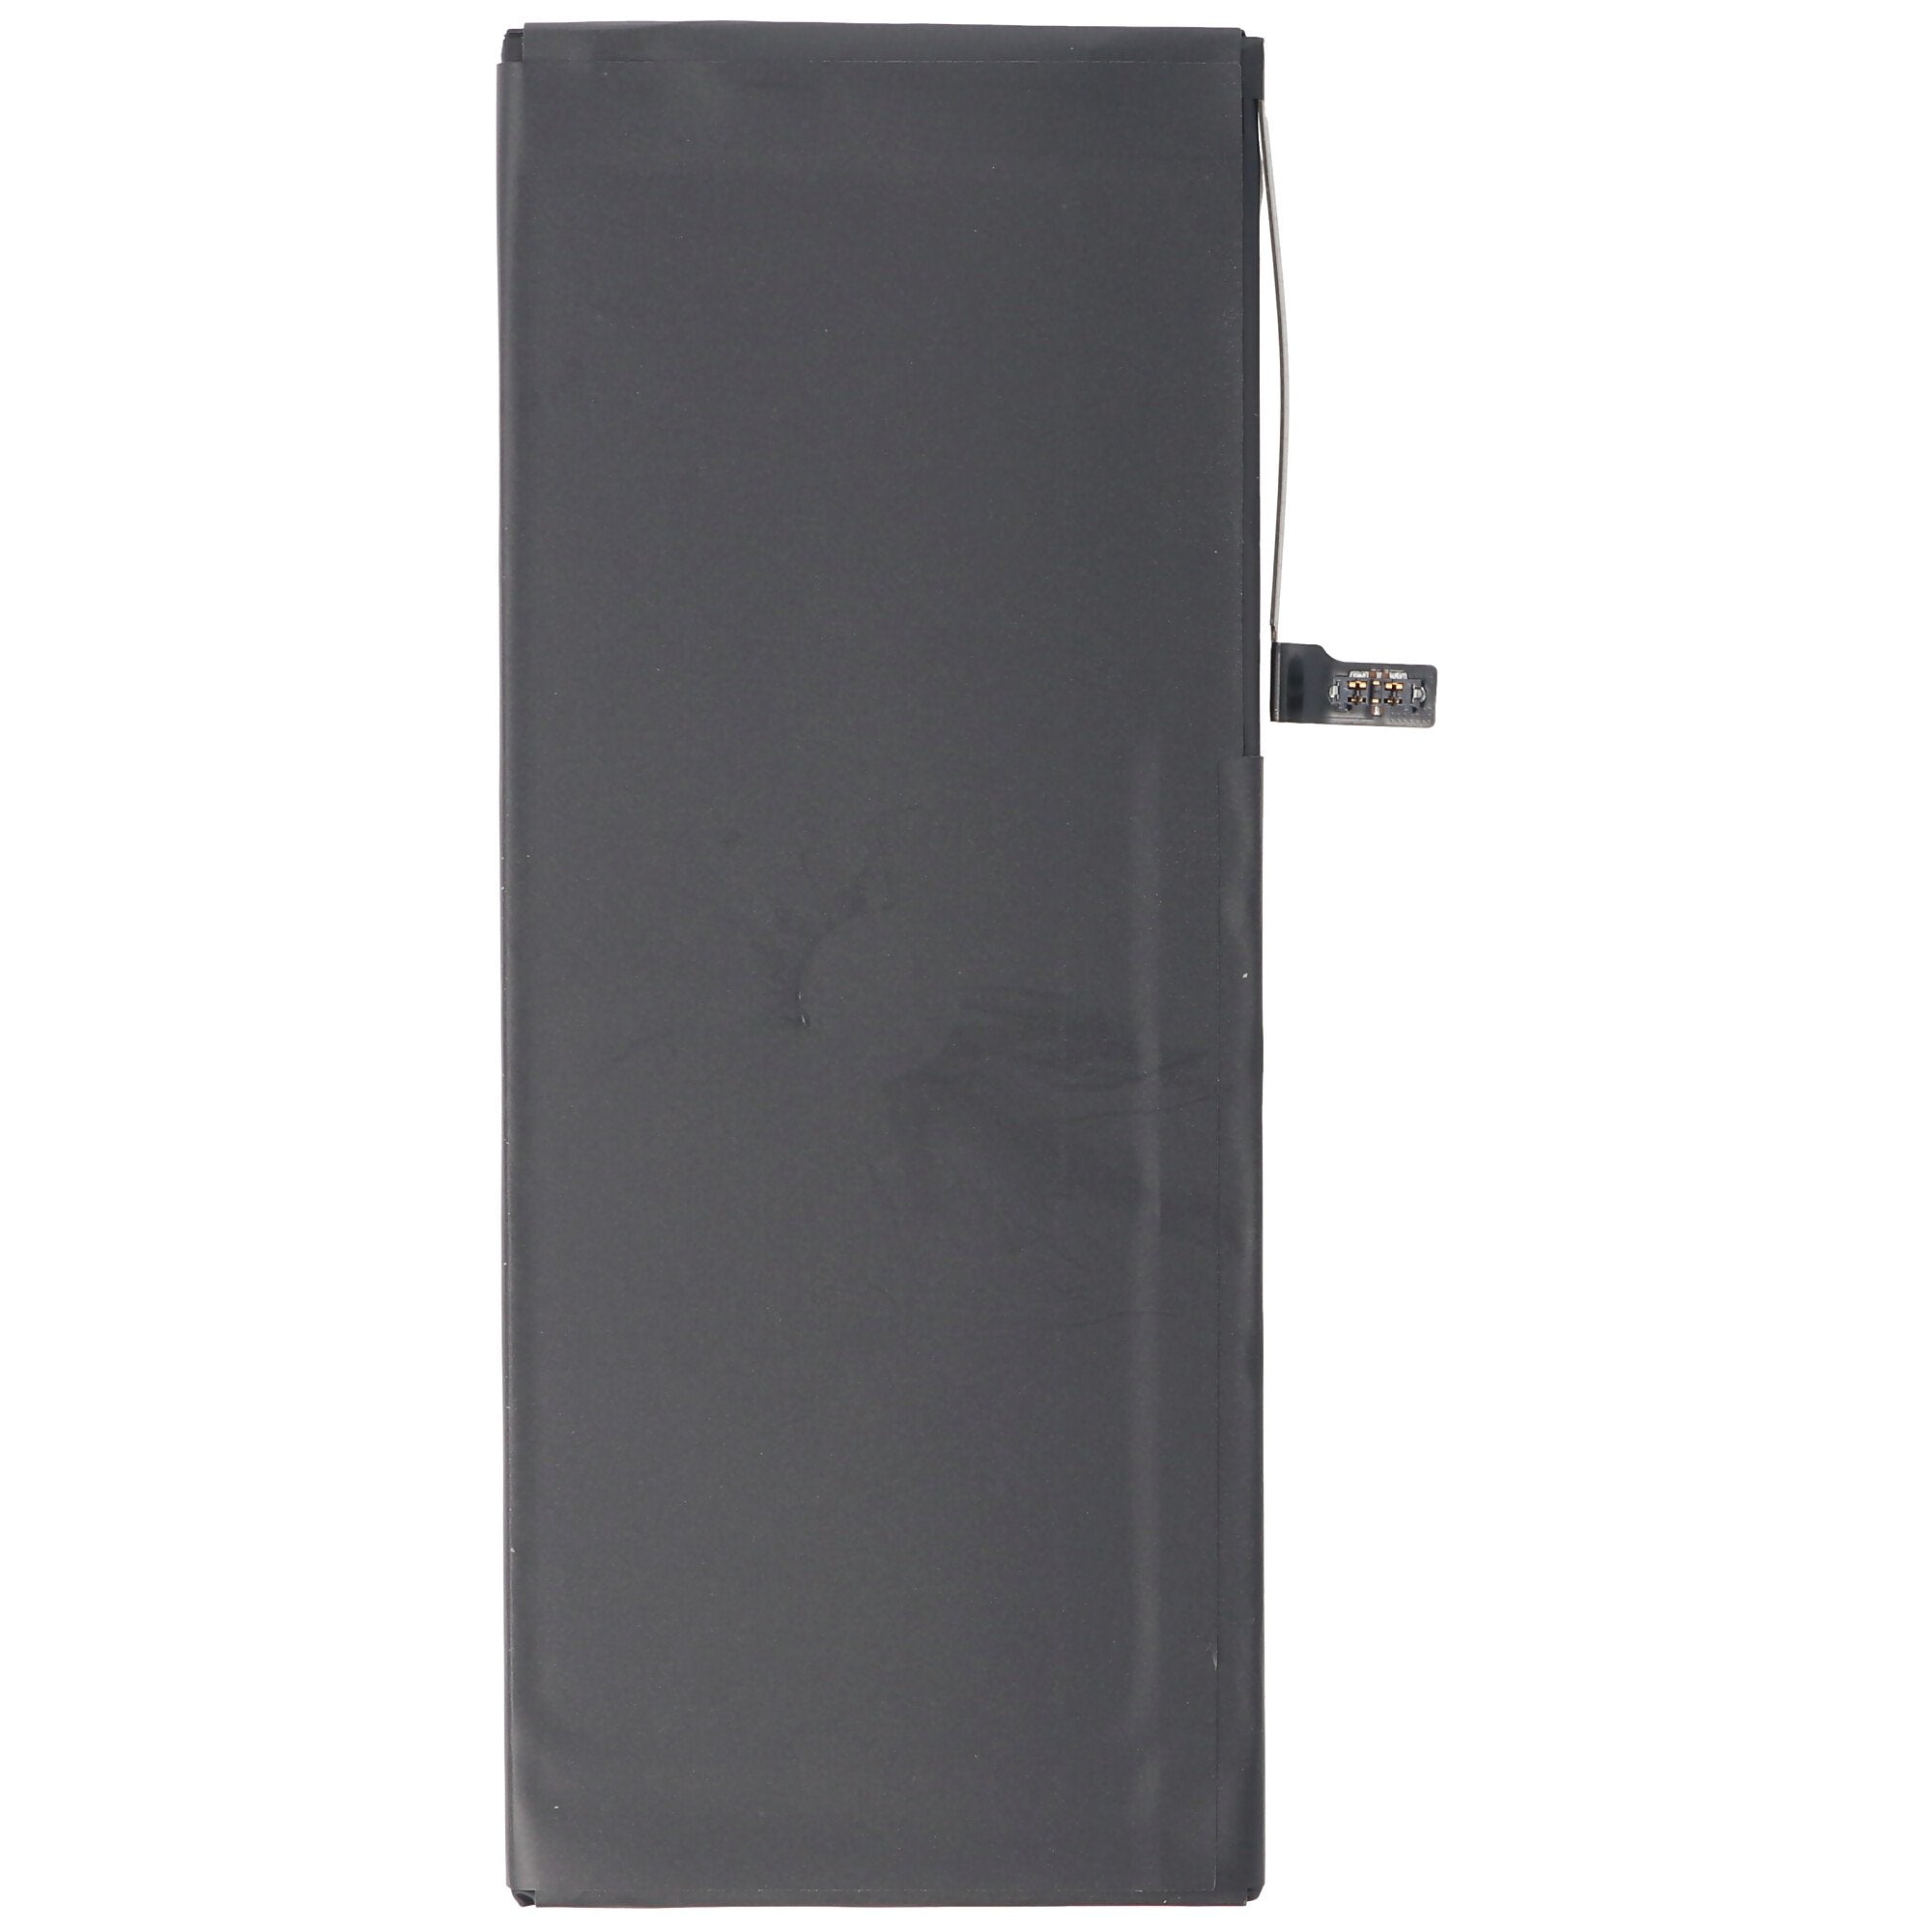 Battery suitable for the Apple iPhone 6S plus battery 616-00045, 2750mAh max. 10.5Wh